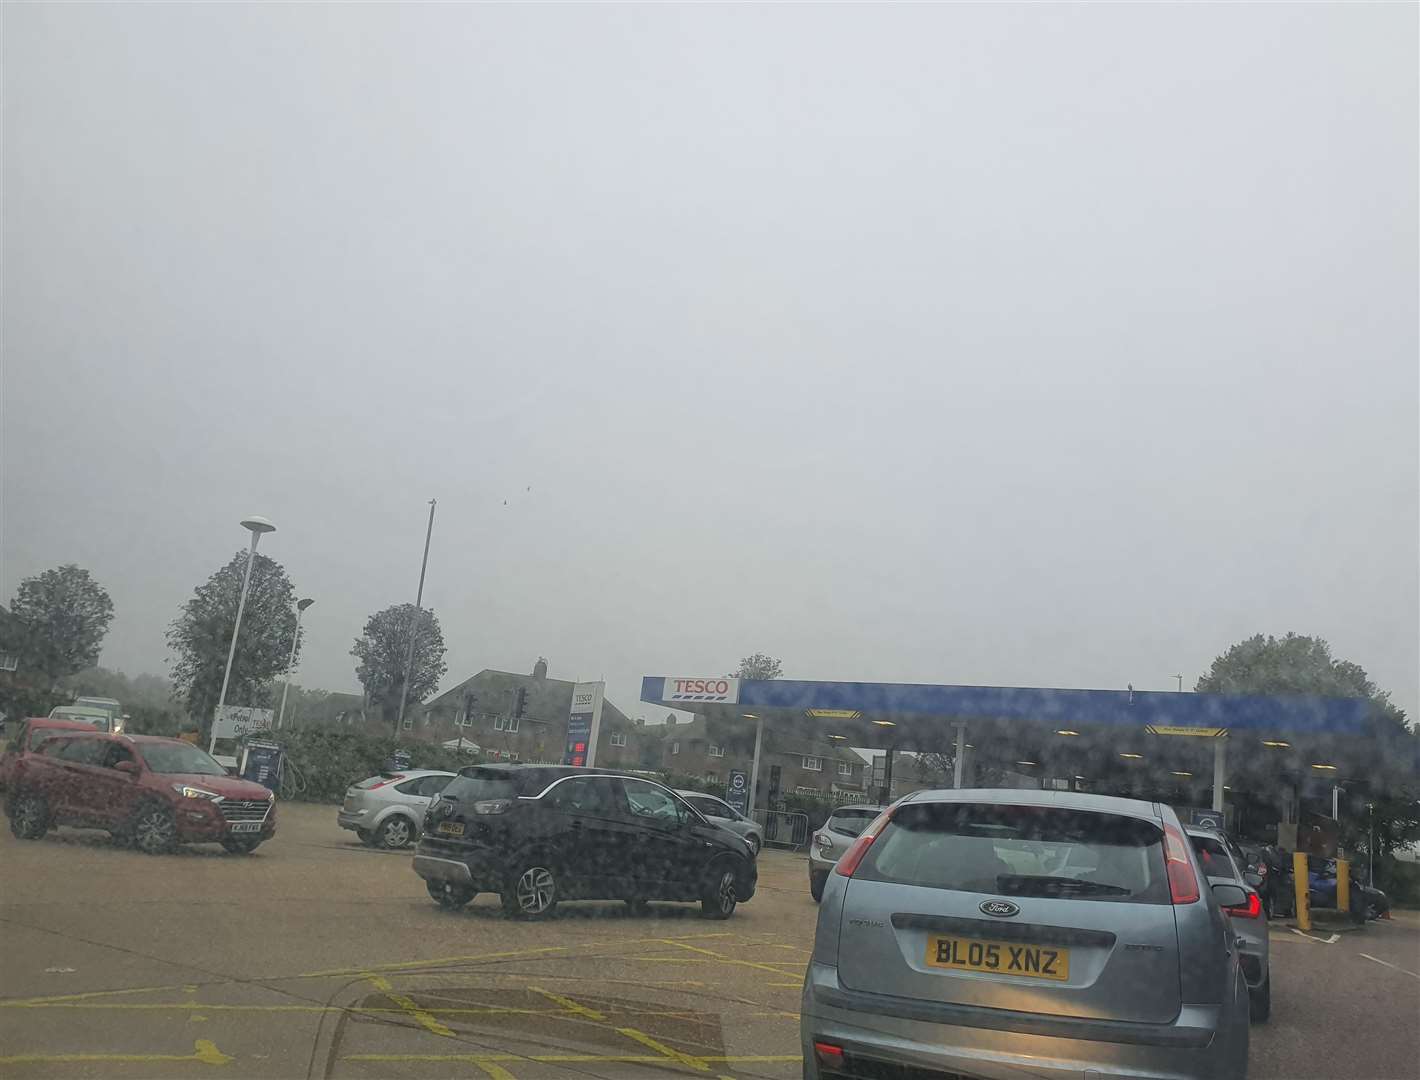 Drivers queuing at the Tesco in Cheriton, Folkestone this morning